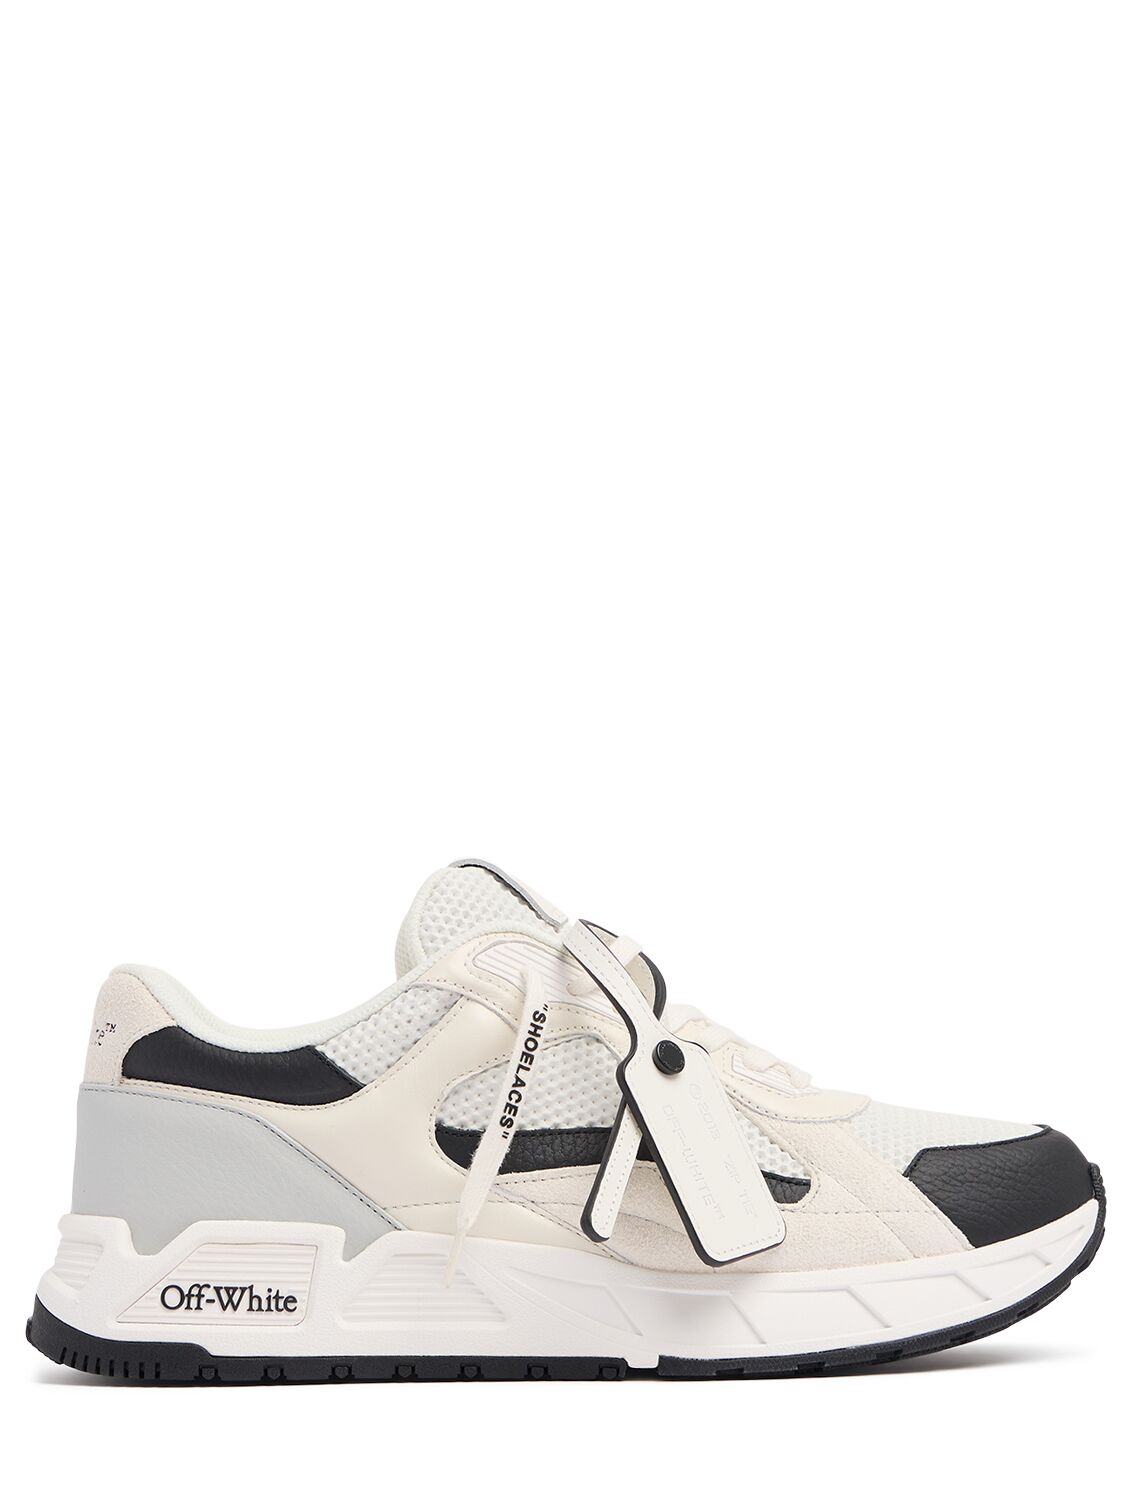 Off-white Kick Off Leather Sneakers In White,black